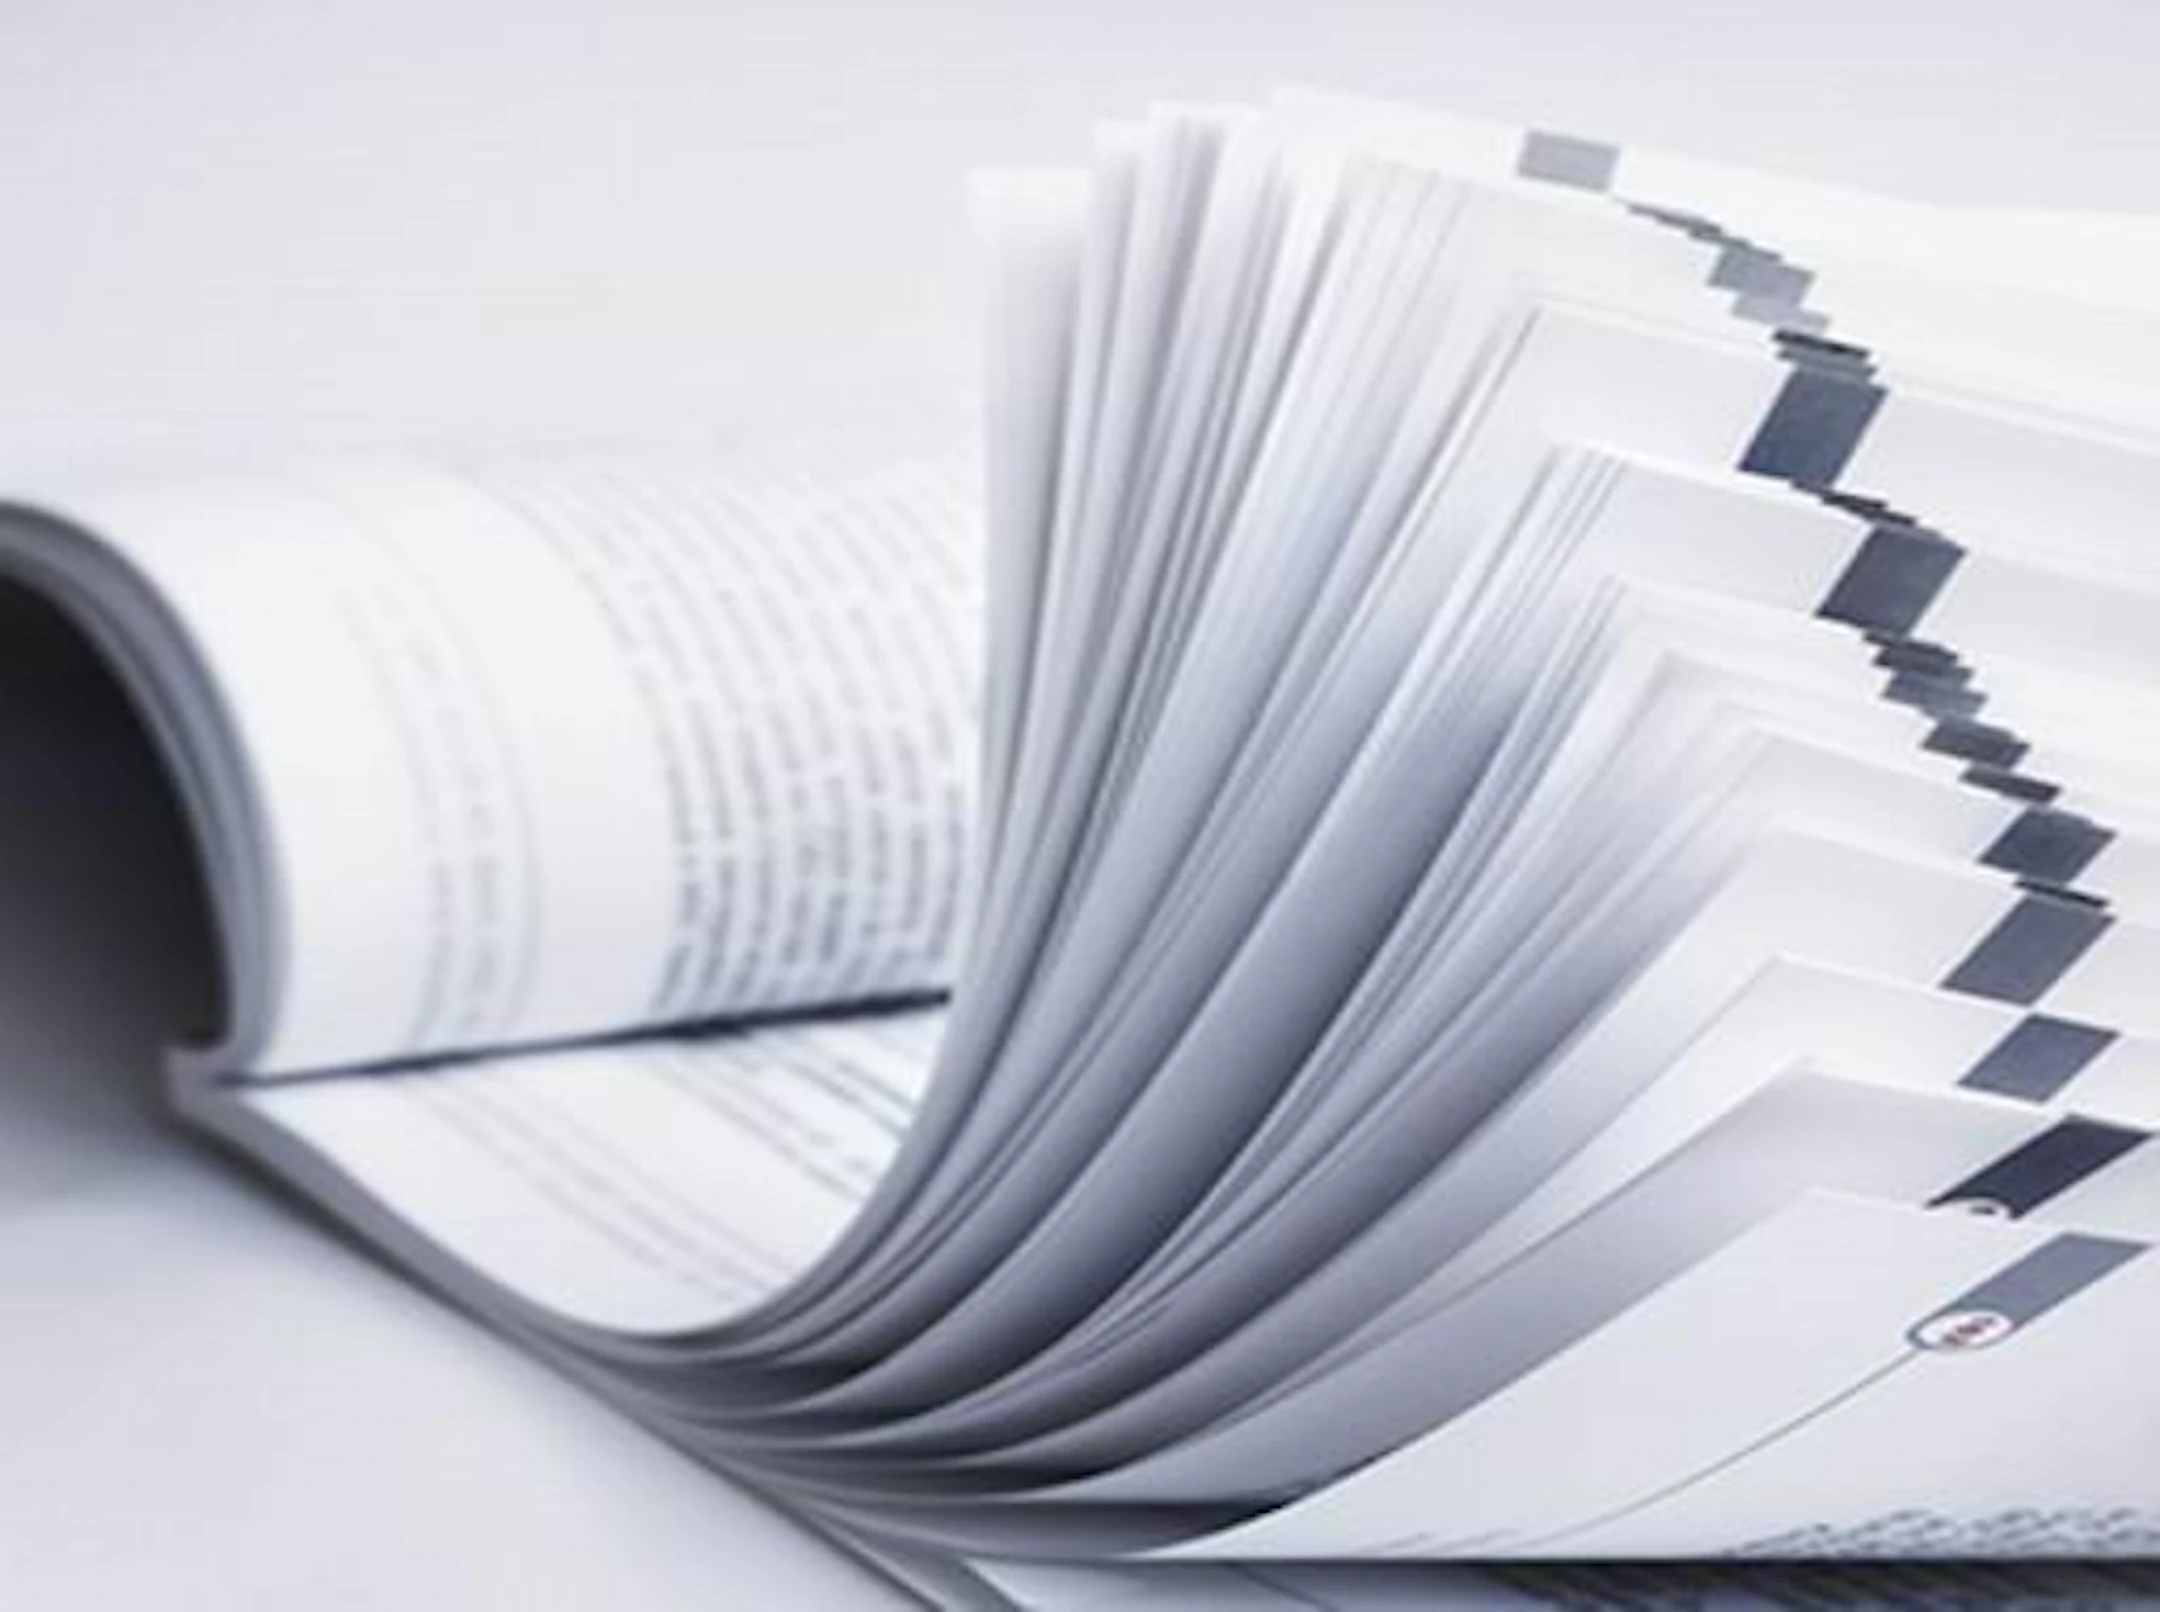 curled pages of a booklet